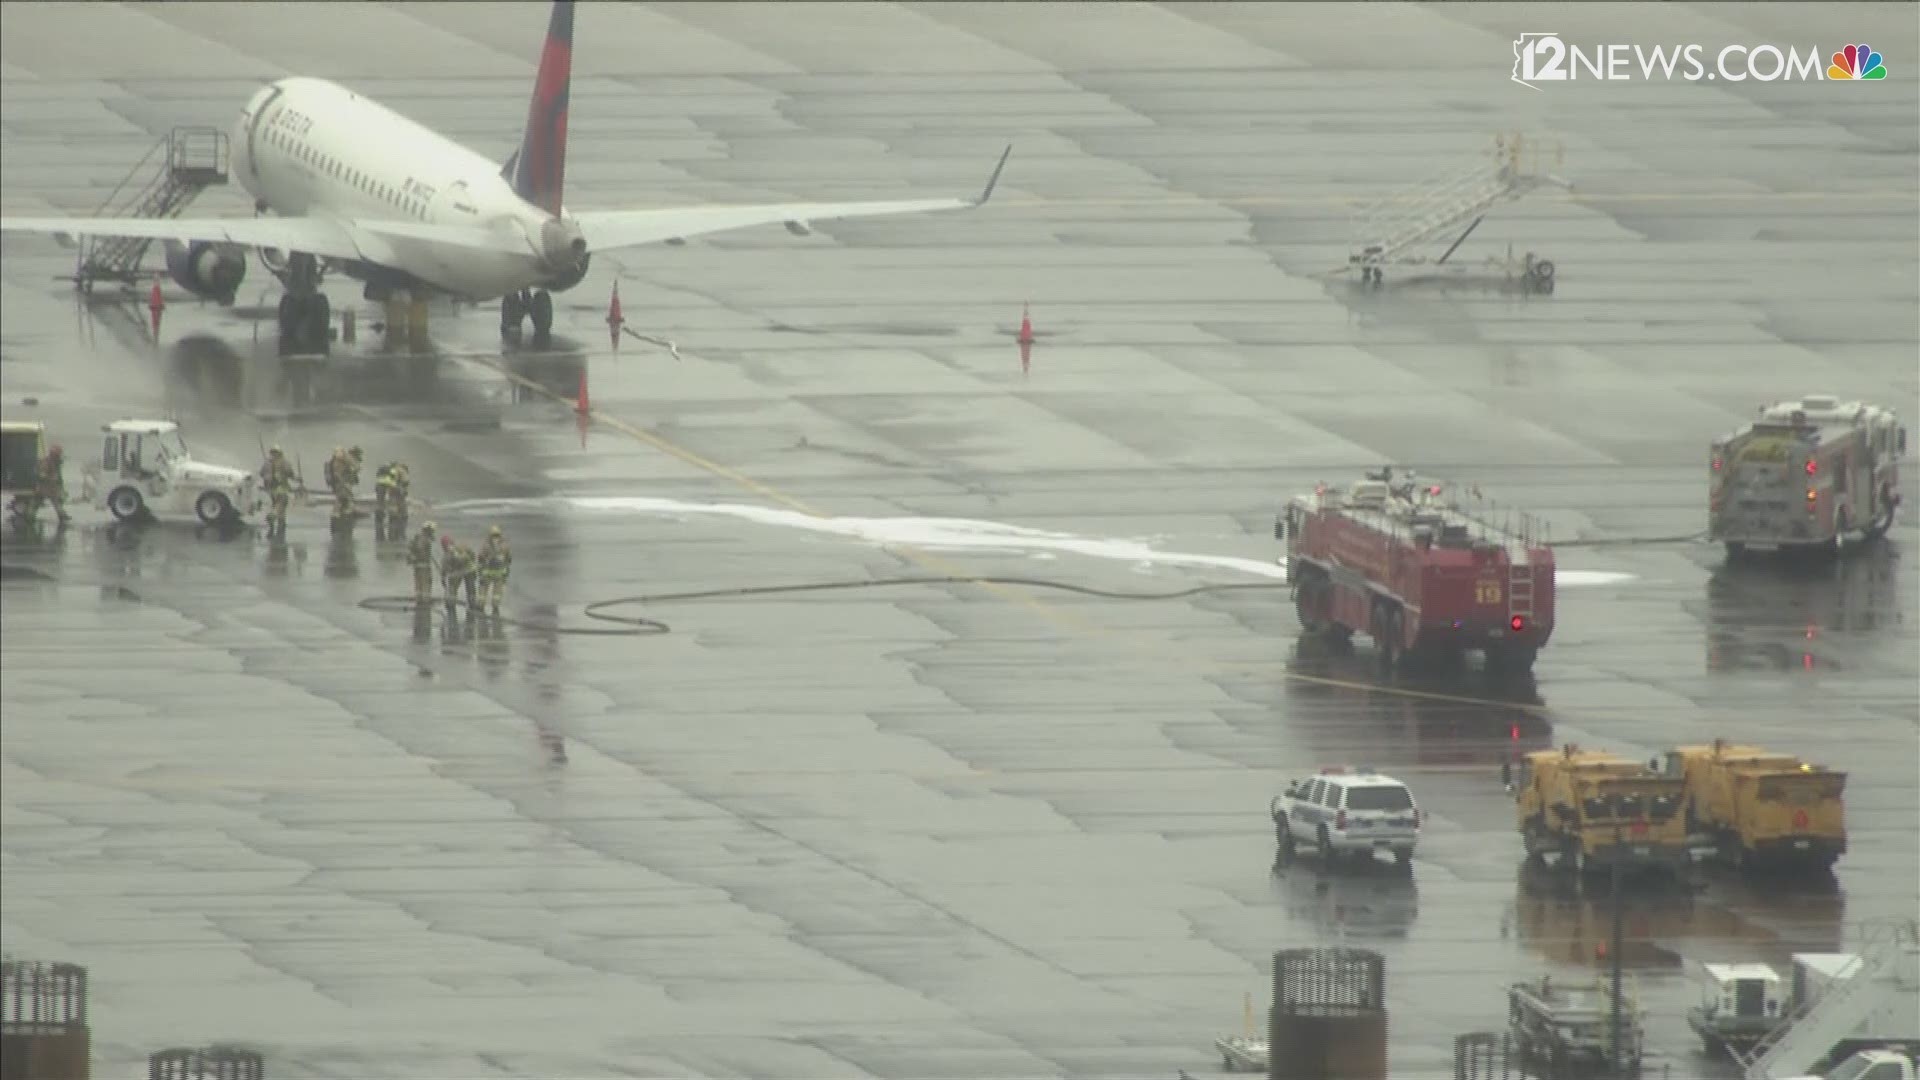 A first alarm hazmat situation was reported at Phoenix Sky Harbor International Airport this afternoon. Fire crews worked to clean up a fuel spill on the tarmac.